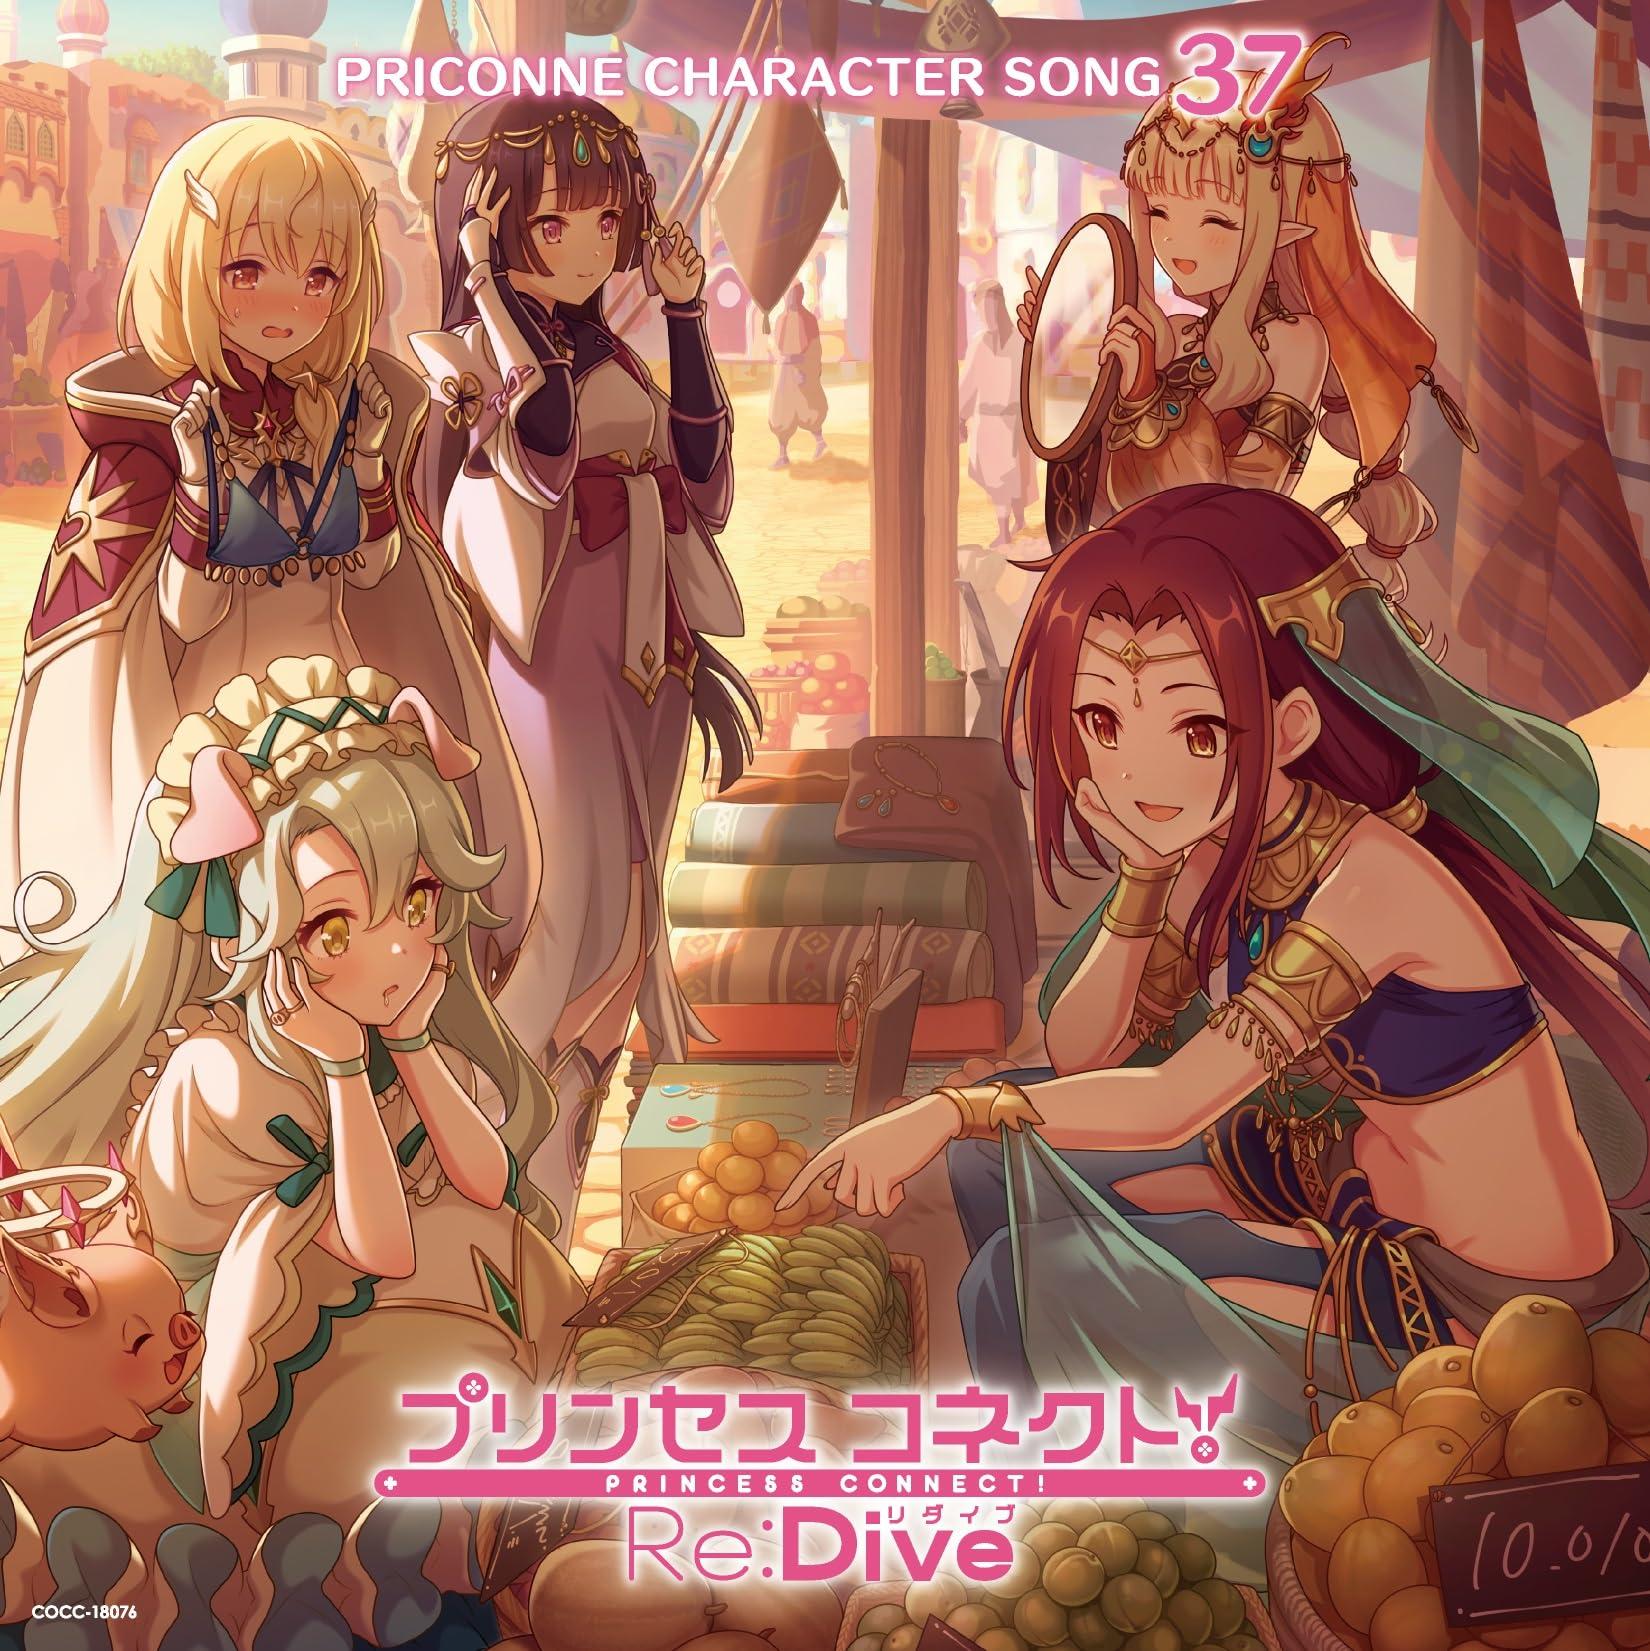 Princess Connect! Re:Dive Priconne Character Song 37